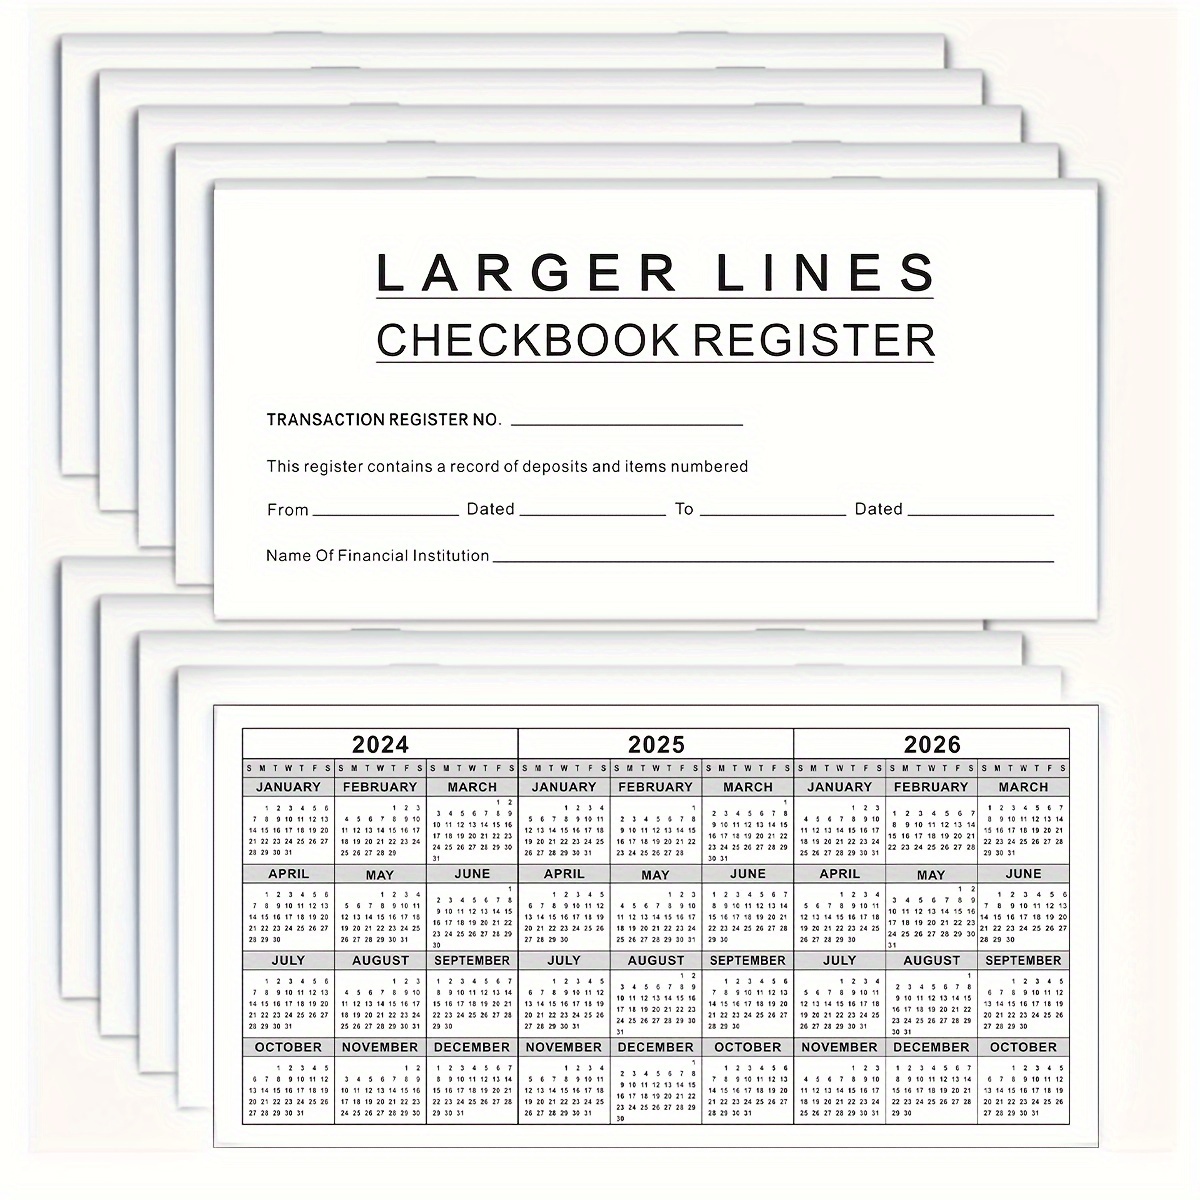 

6/10pcs New Year Larger Lines Checkbook Registers, For Personal Checkbook, 2024 2025 2026, Deposit, Credit, Bank Account Balance Checkbook Ledger Transaction Registers, Easy To Read For Poor Vision